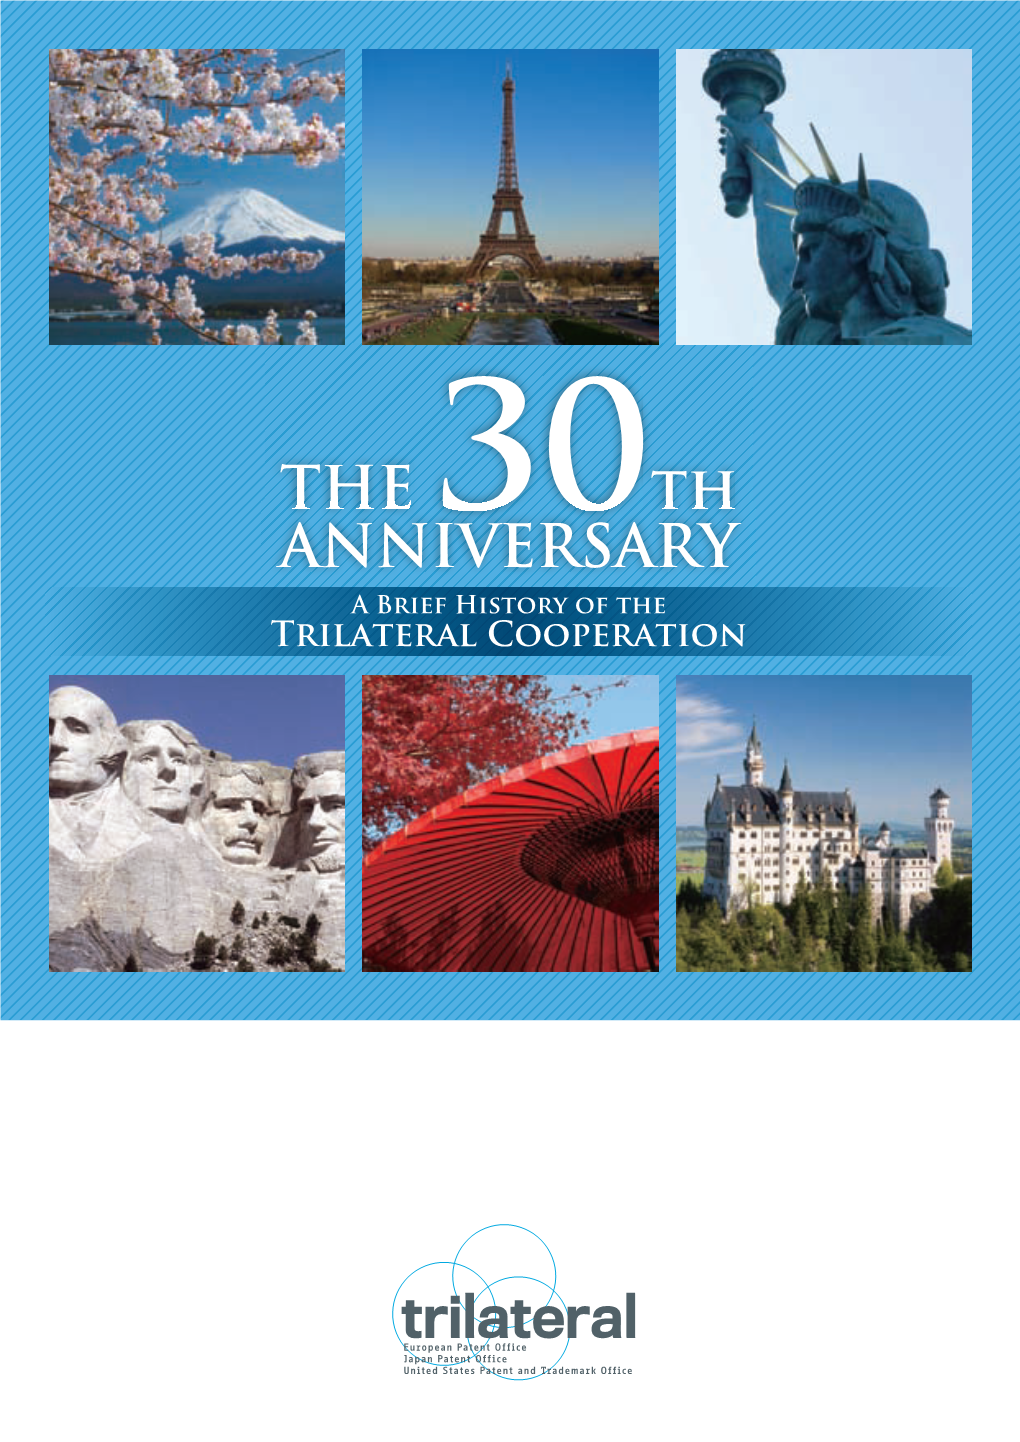 THE 30Th ANNIVERSARY a Brief History of the Trilateral Cooperation